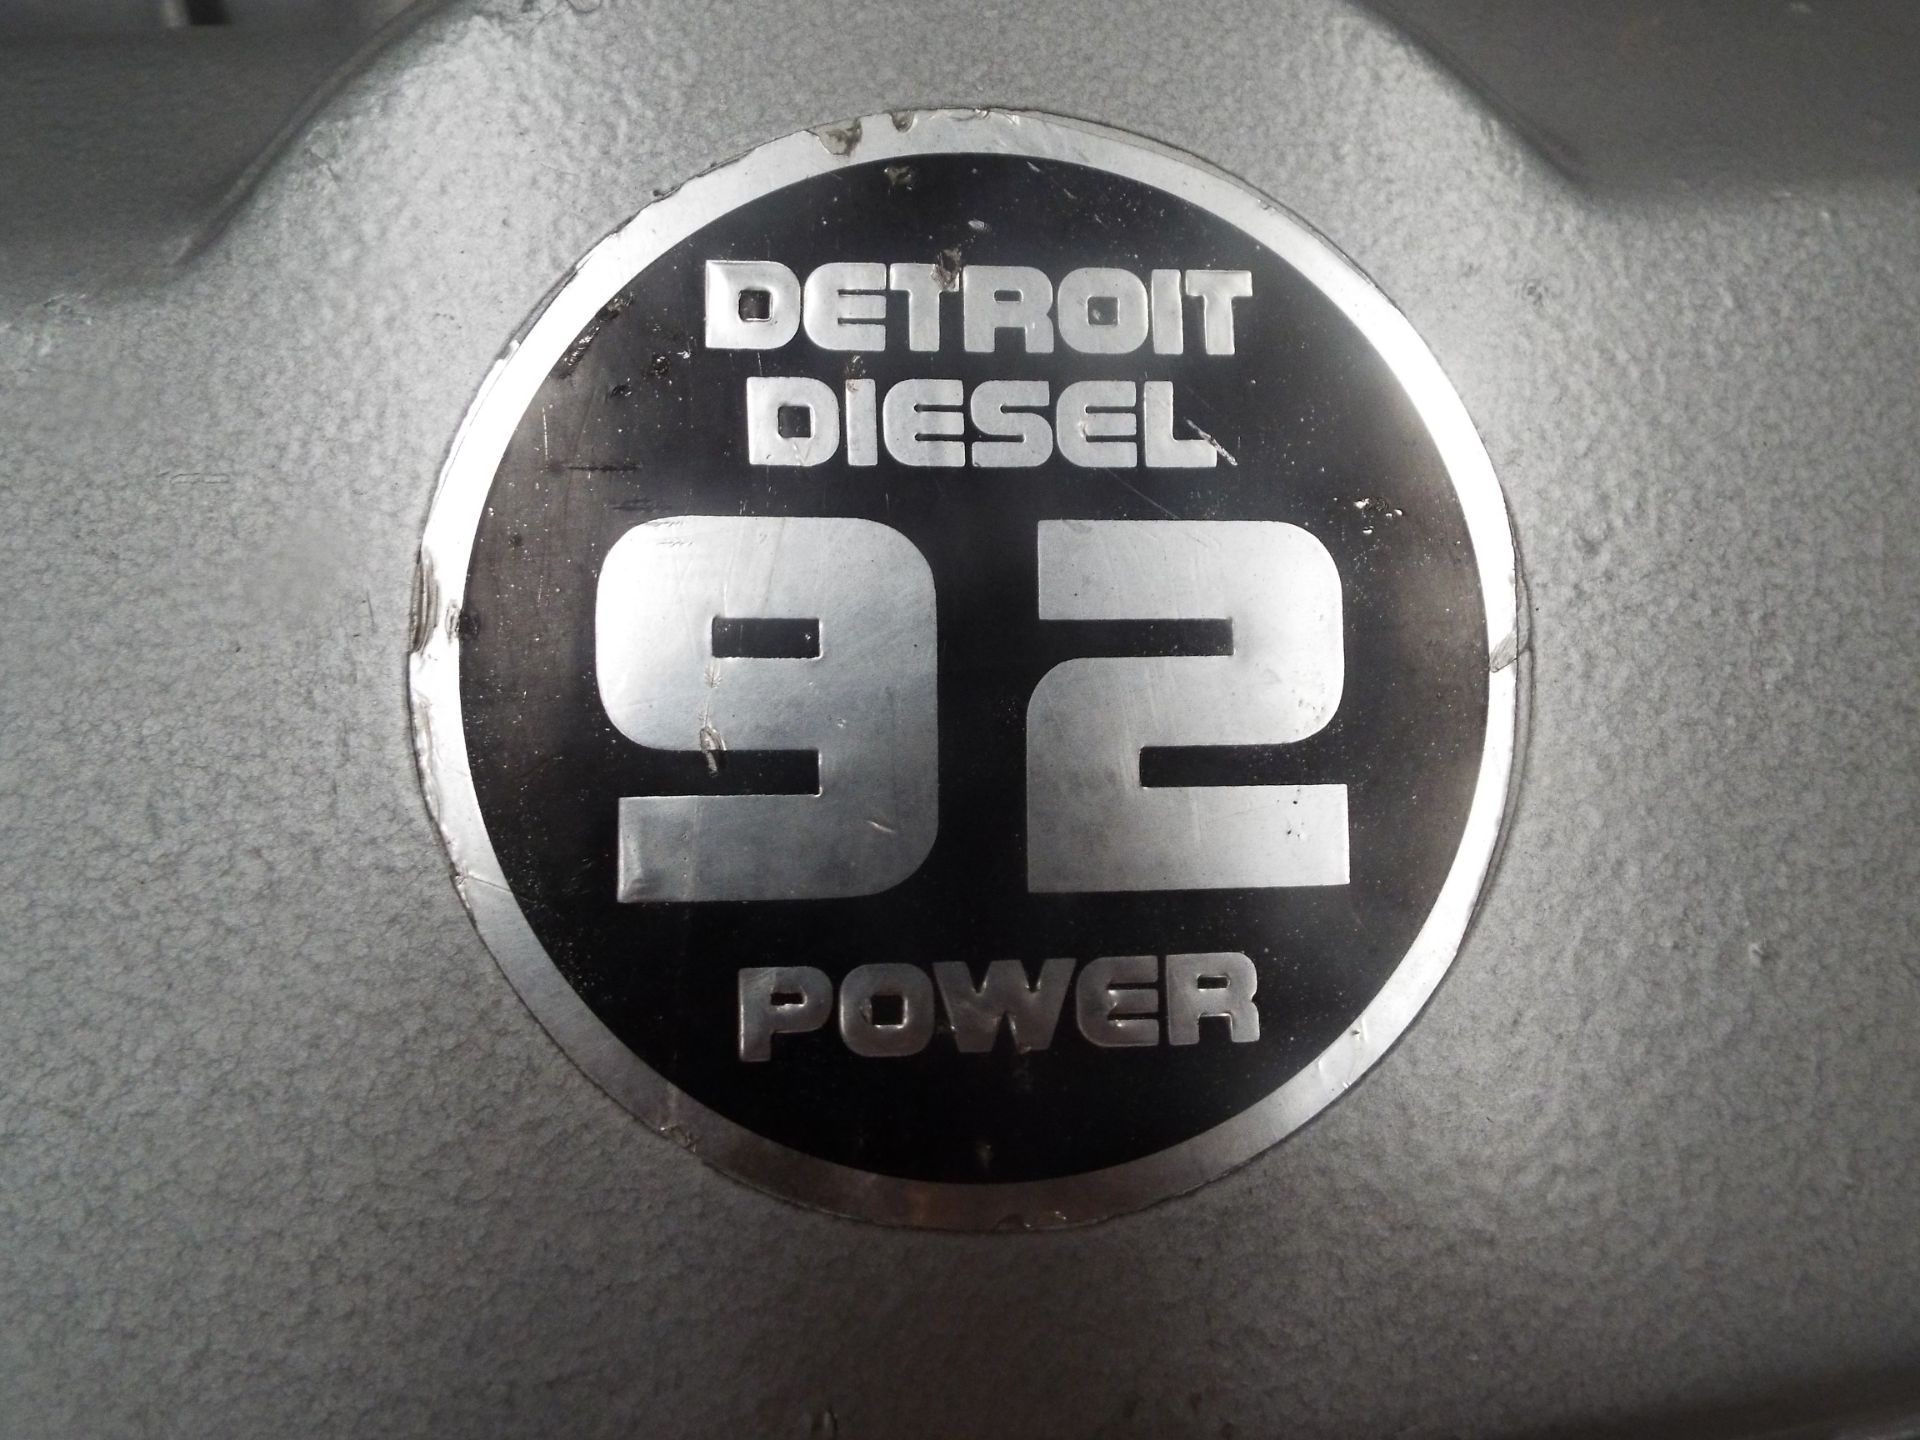 Detroit 8V-92TA DDEC V8 Turbo Diesel Engine Complete with Ancillaries and Starter Motor - Image 17 of 20